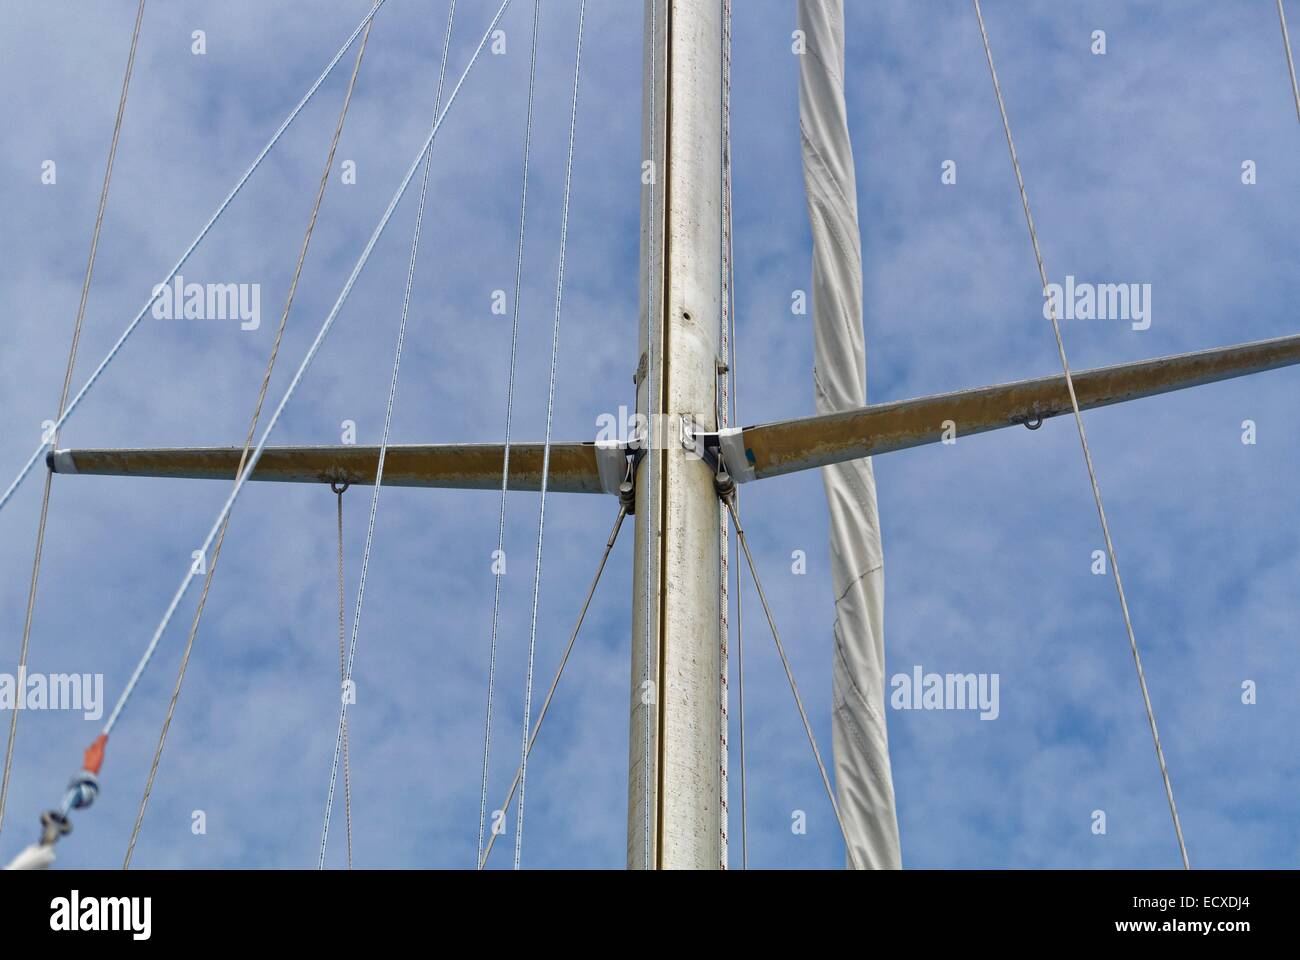 Alloy mast and spreaders to guide the loads exerted on the sails of a 1970s vintage sailing yacht Stock Photo